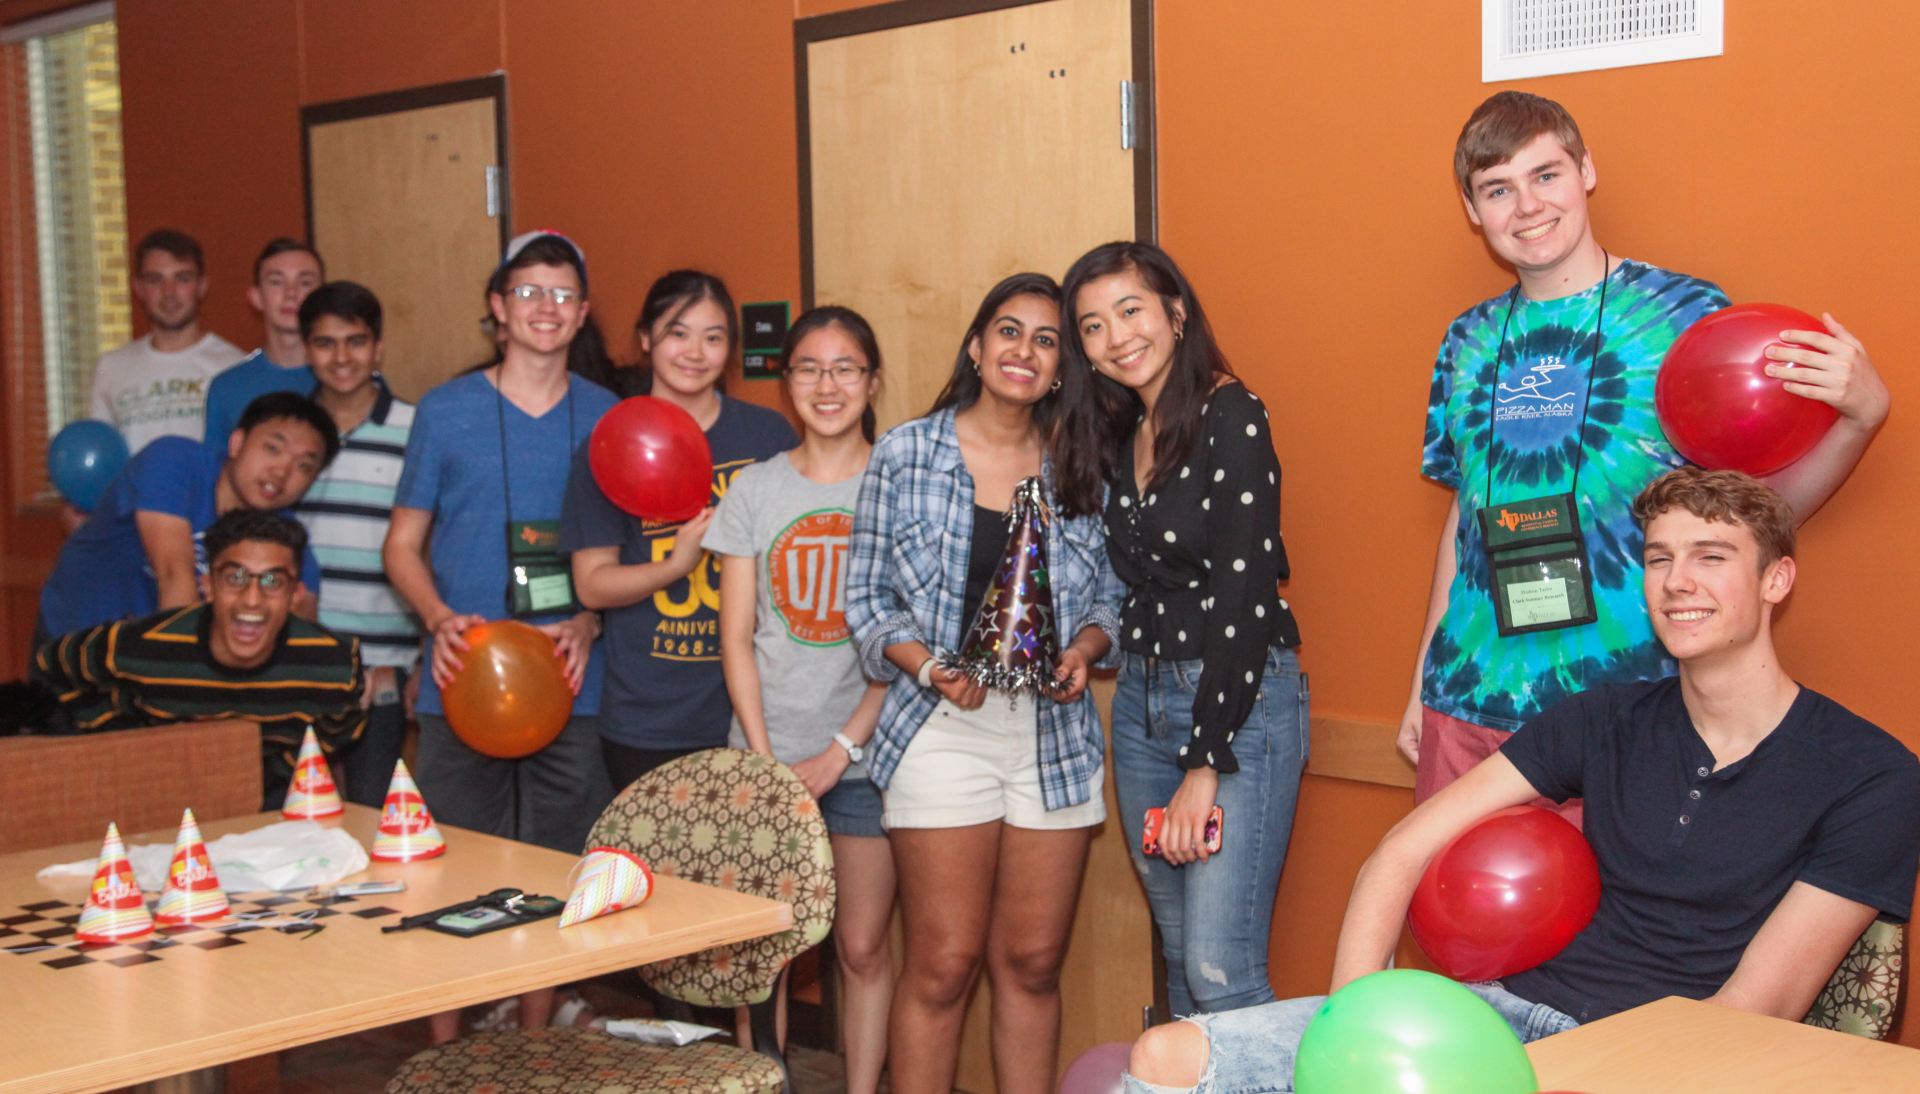 Students holding balloons at a birthday party.